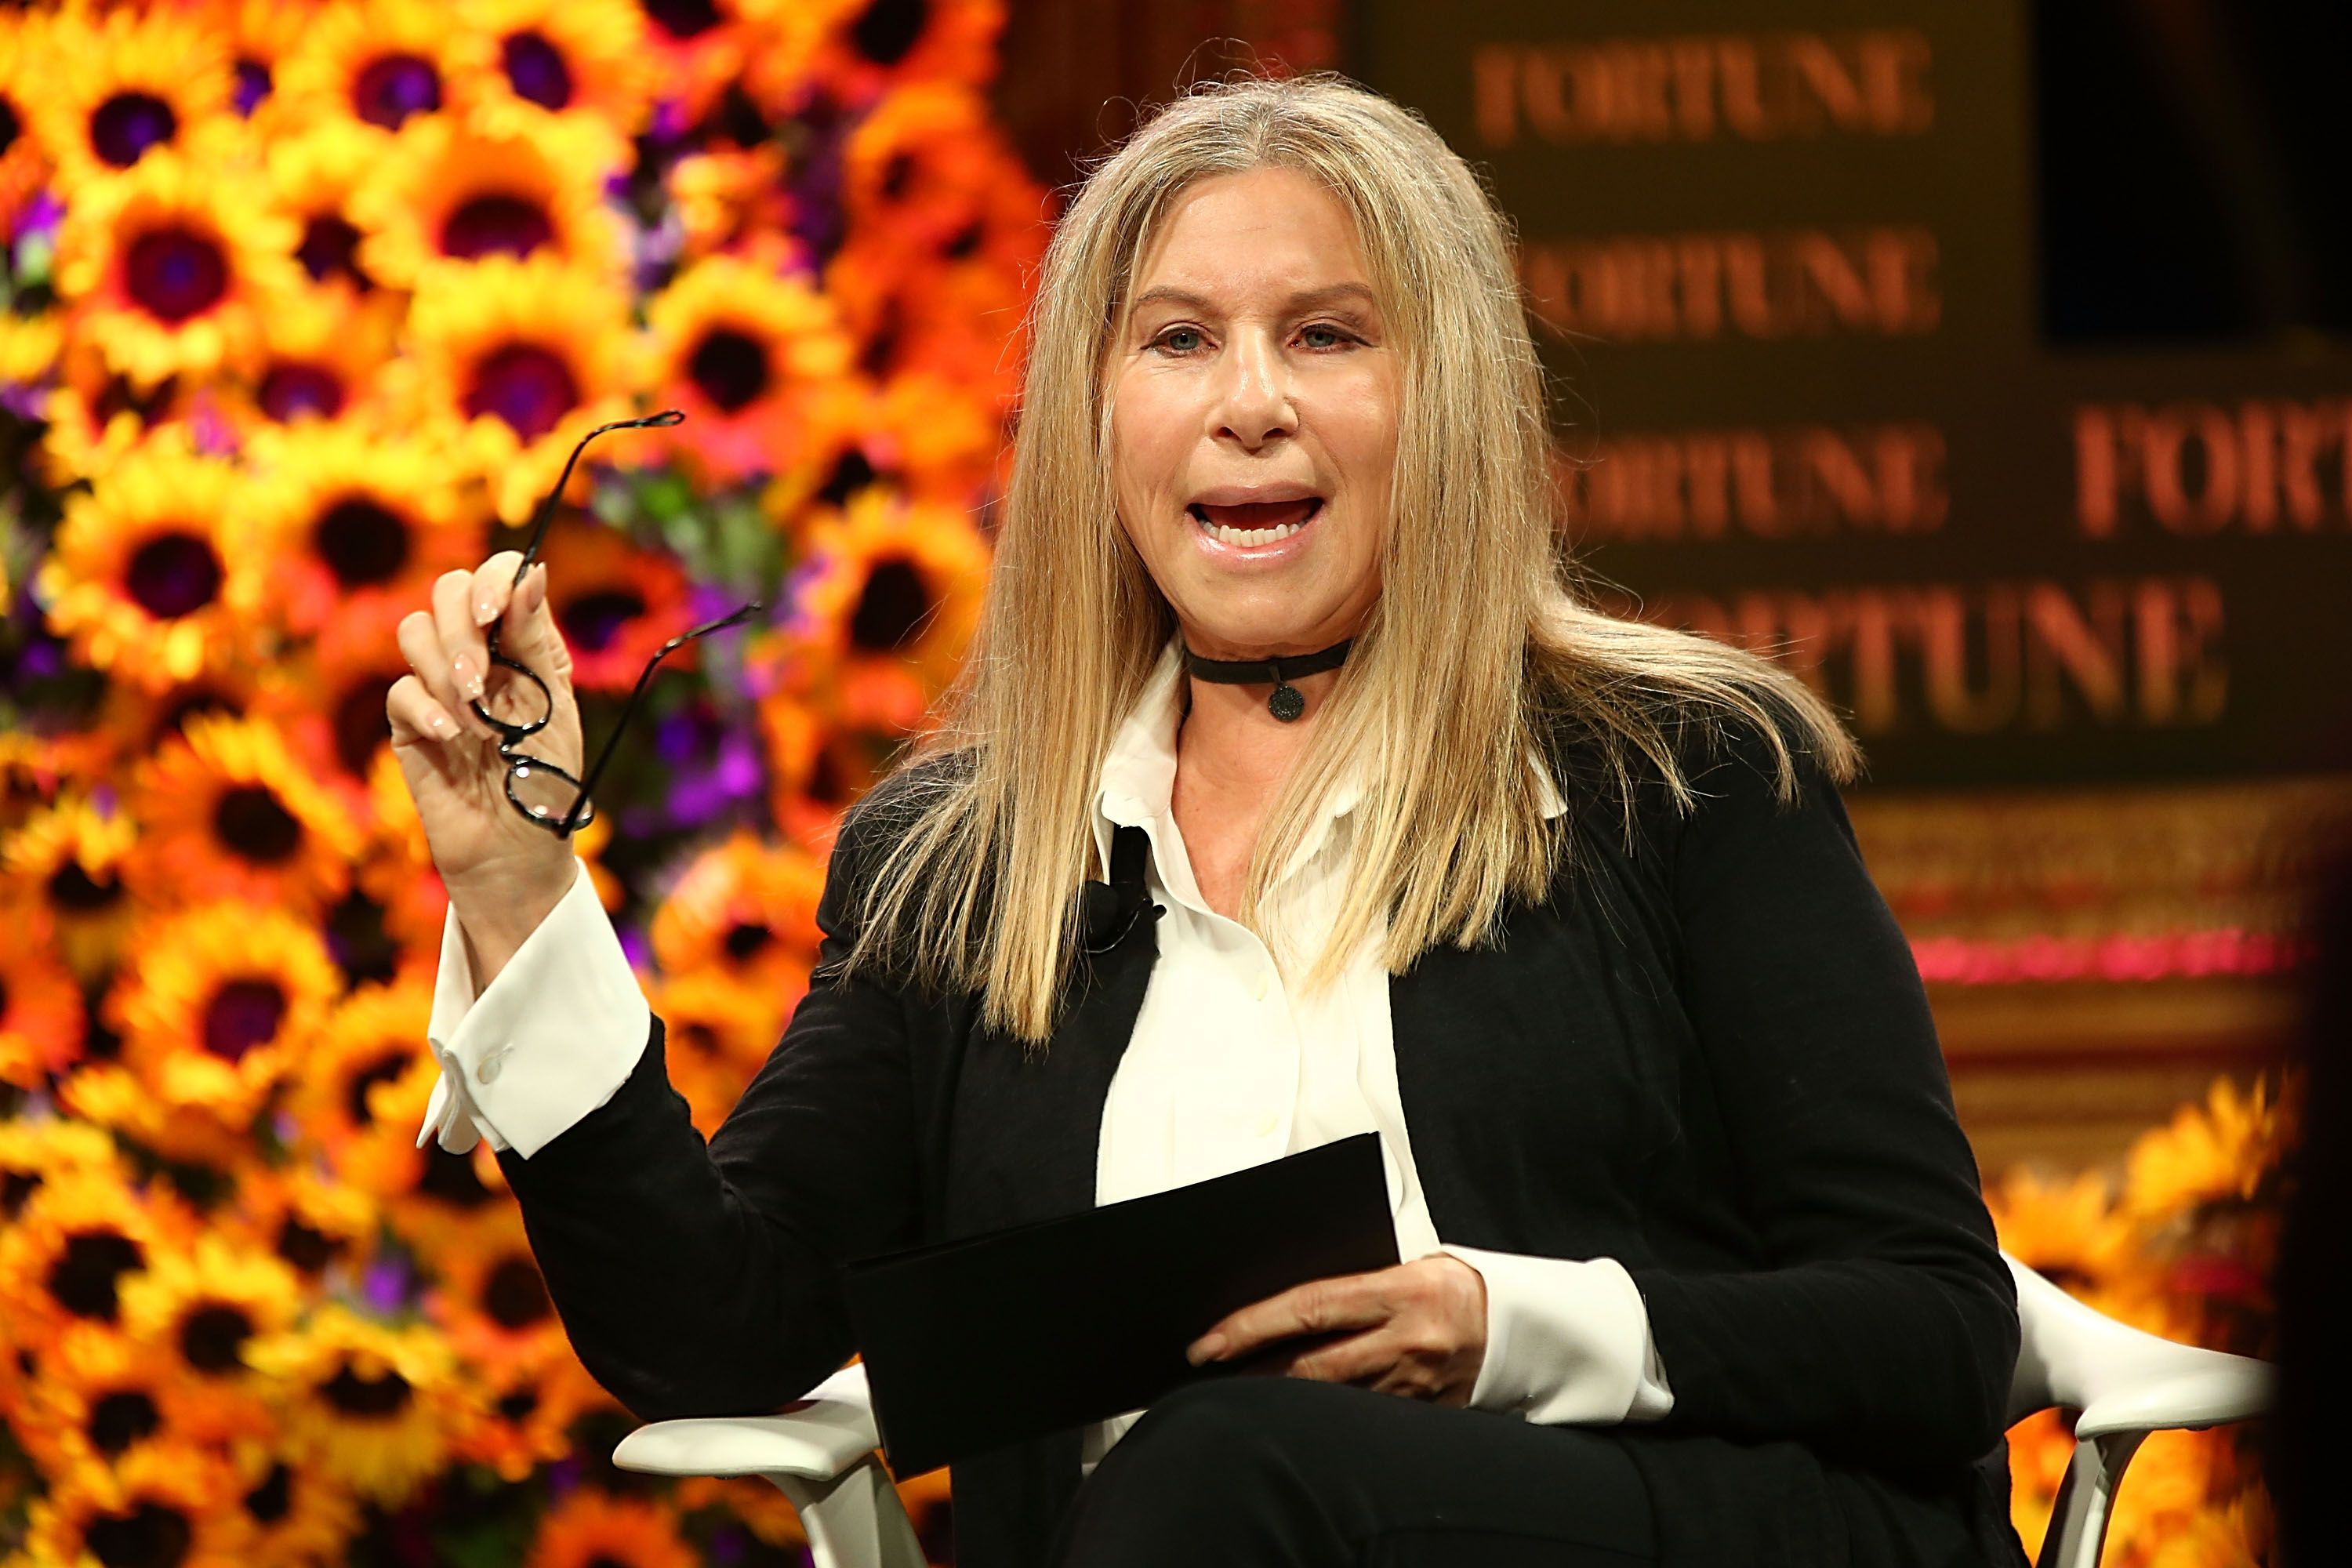 Barbara Streisand speaks onstage at the Fortune Most Powerful Women Summit 2016 at Ritz-Carlton Laguna Niguel on October 18, 2016 in Dana Point, California. | Source: Getty Images